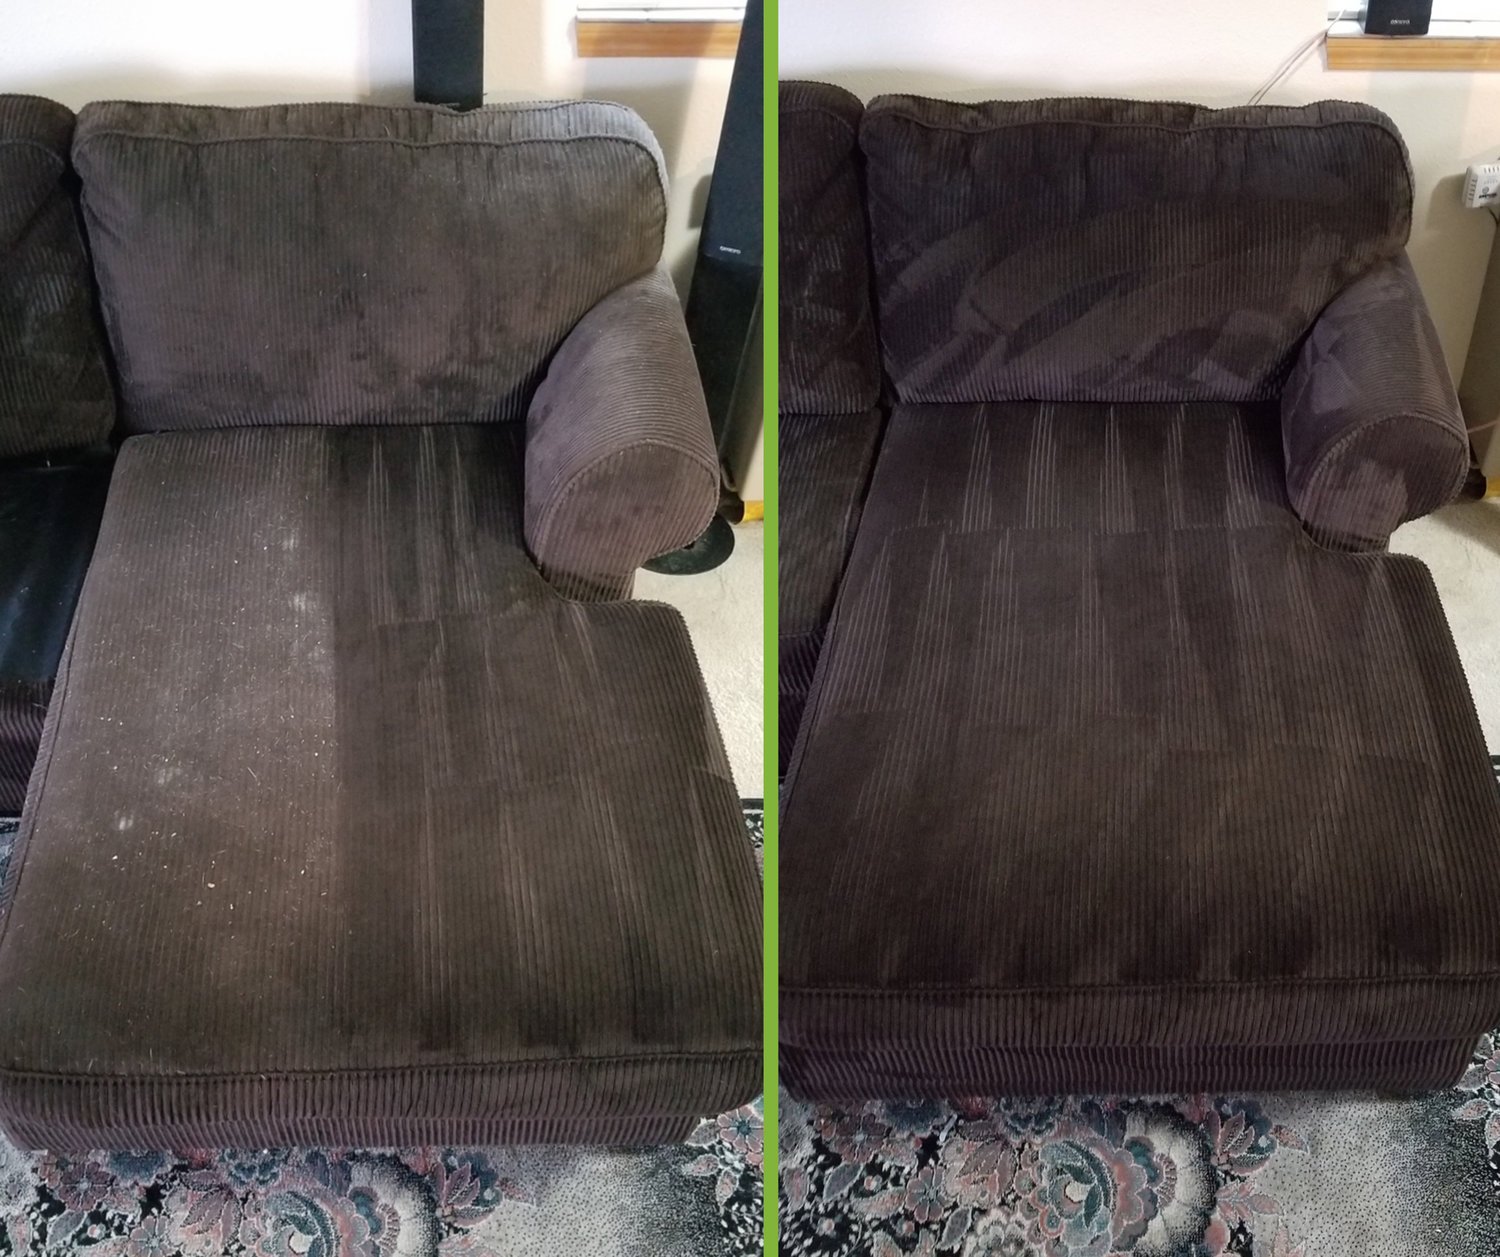 Upholstery cleaning in post falls